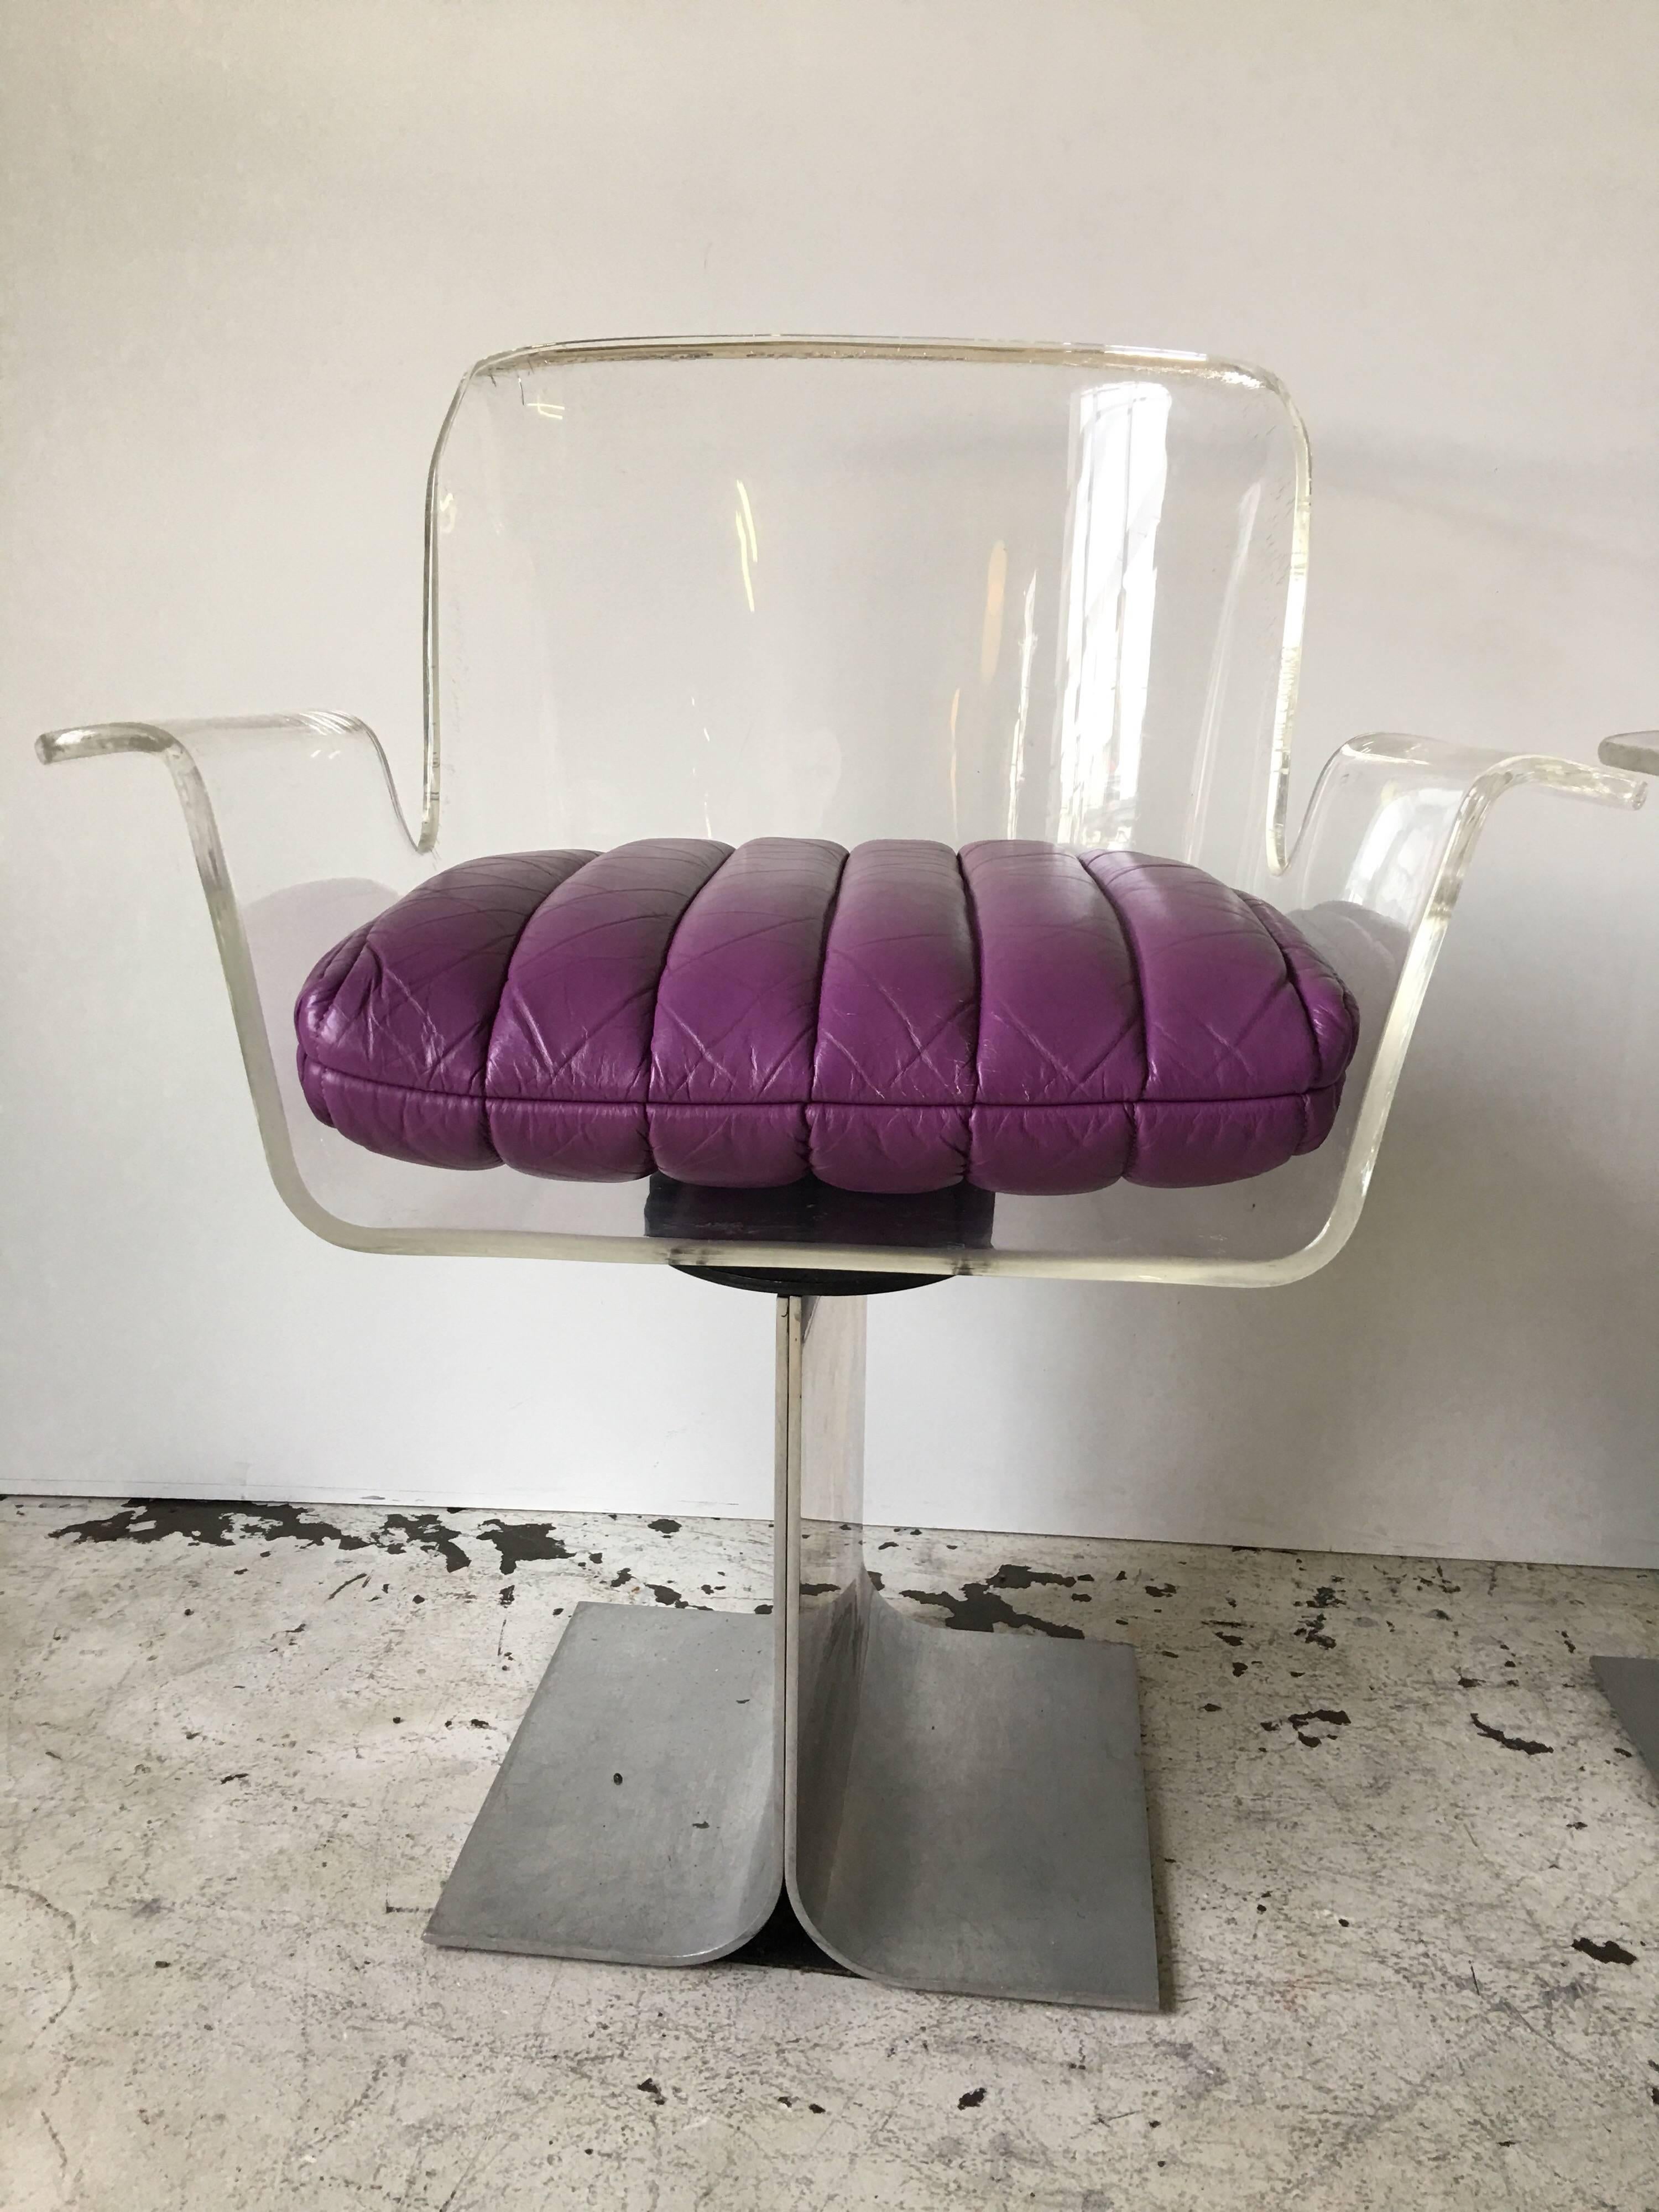 This is for a pair of dramatic curving armchairs in Lucite or acrylic for Pace Collection. They come with original purple channeled leather seat cushions, which add an additional 4